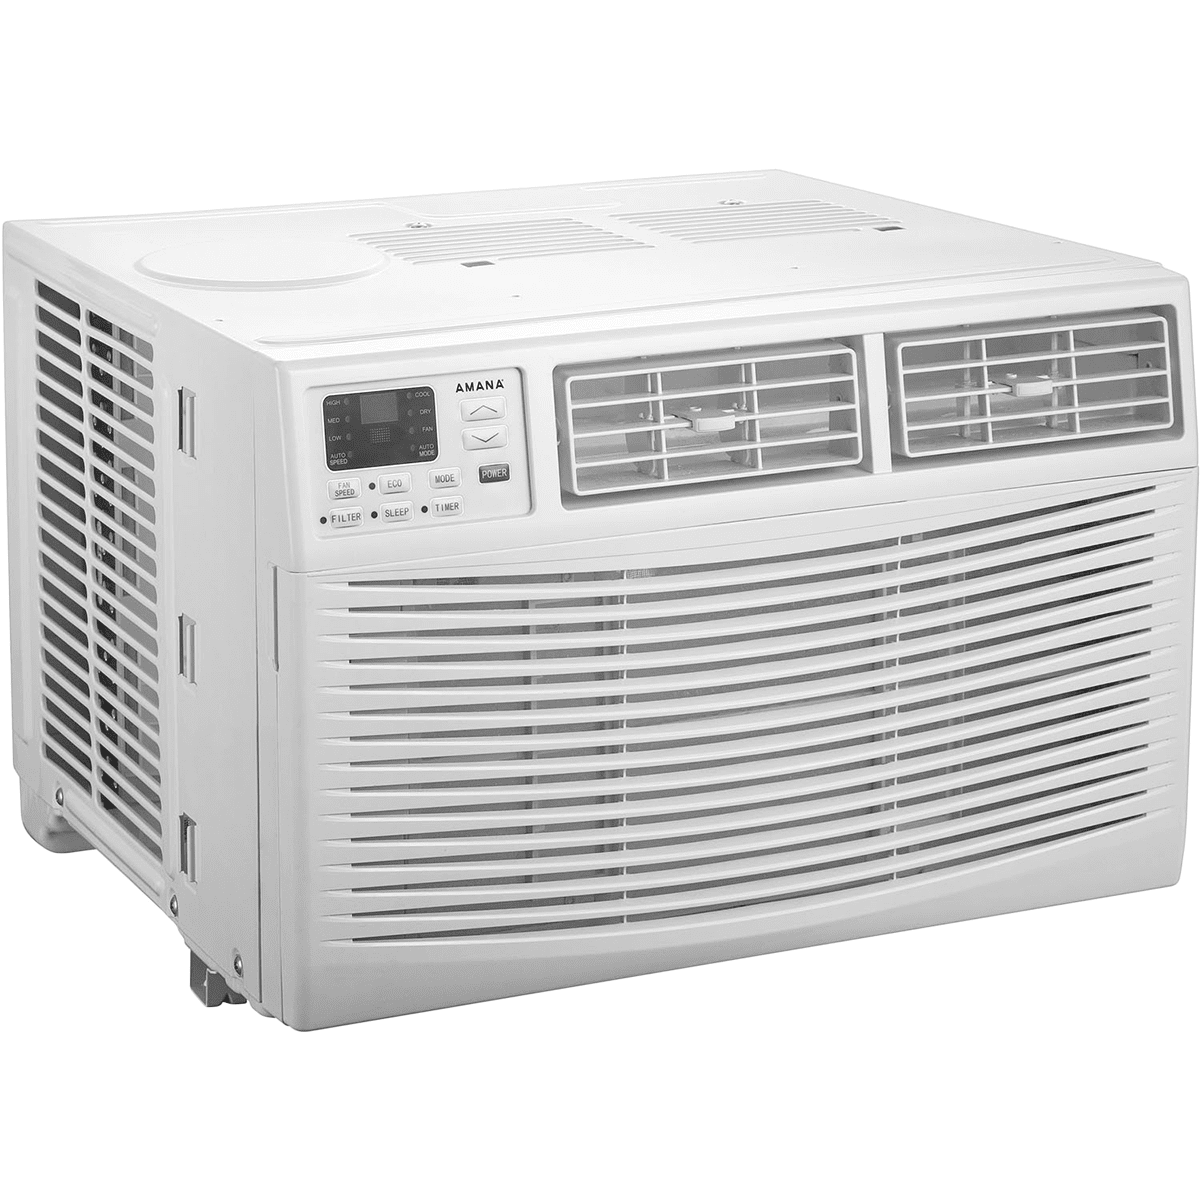 Amana 12000 Btu Window Air Conditioner With Electronic Controls Amap121bw